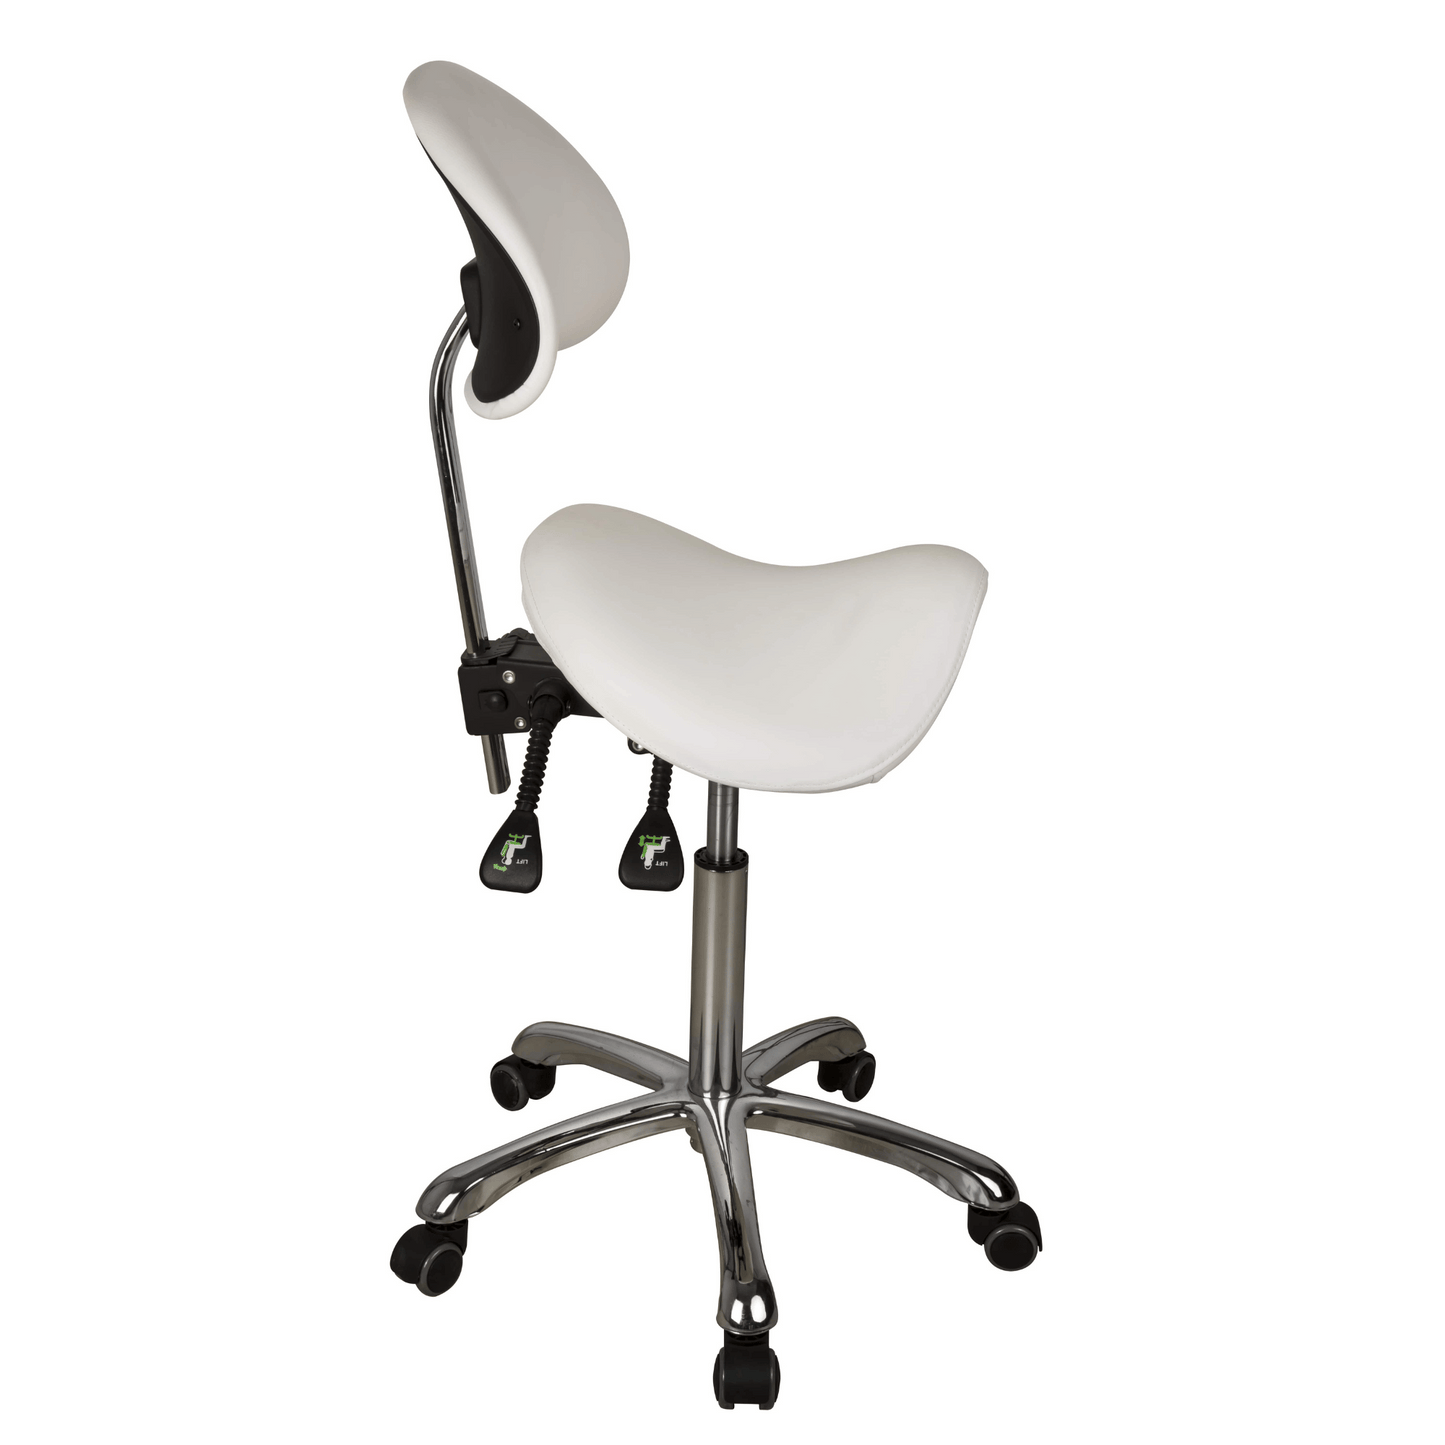 The Lolli Saddle Stool White Adjustable height and back Image 6